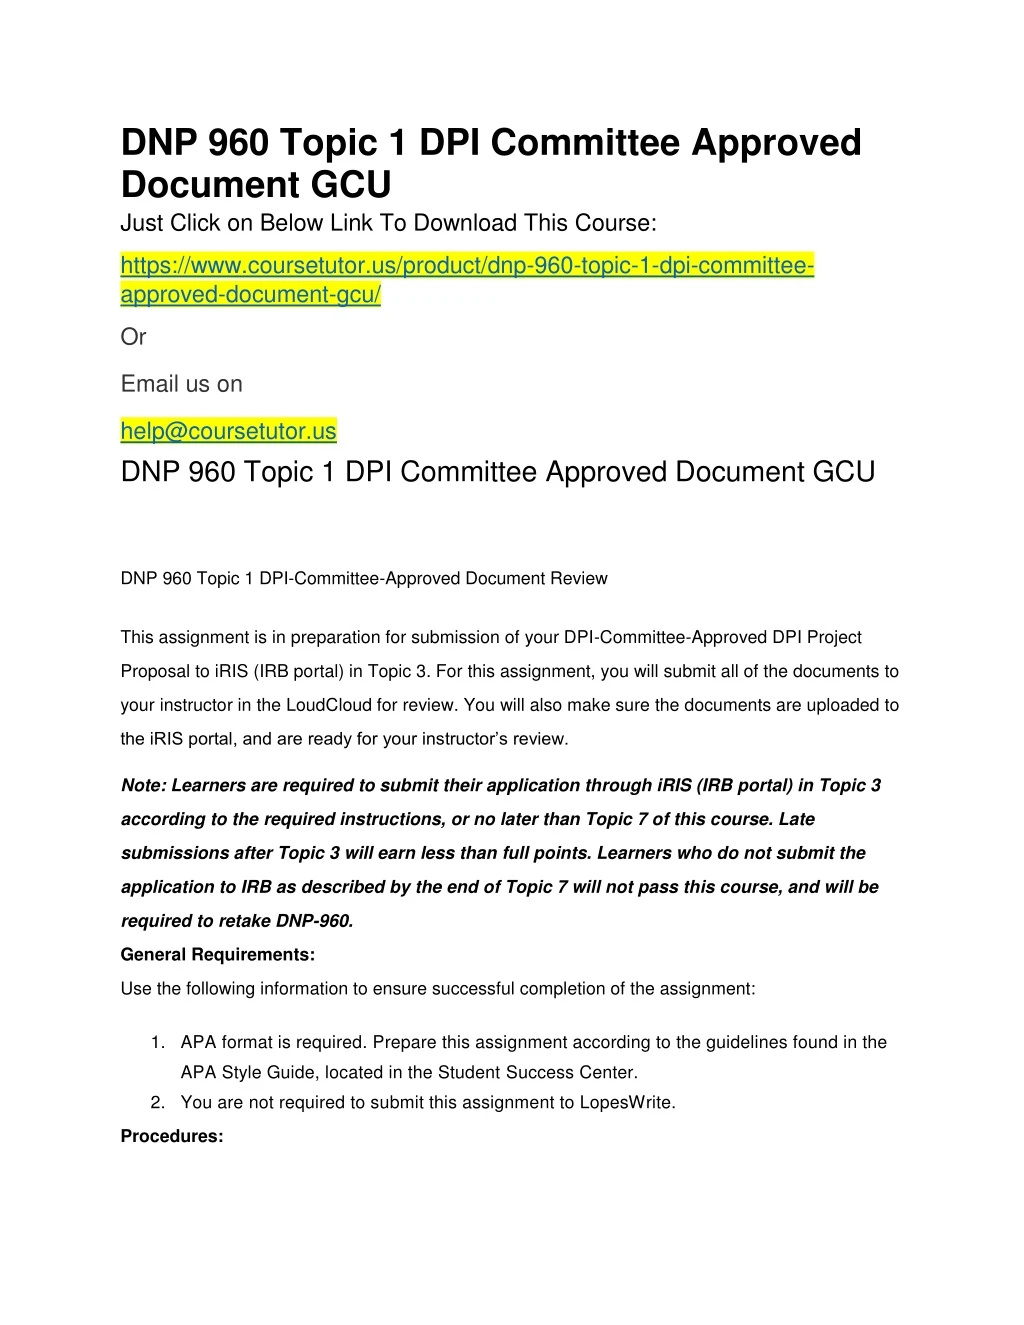 dnp 960 topic 1 dpi committee approved document